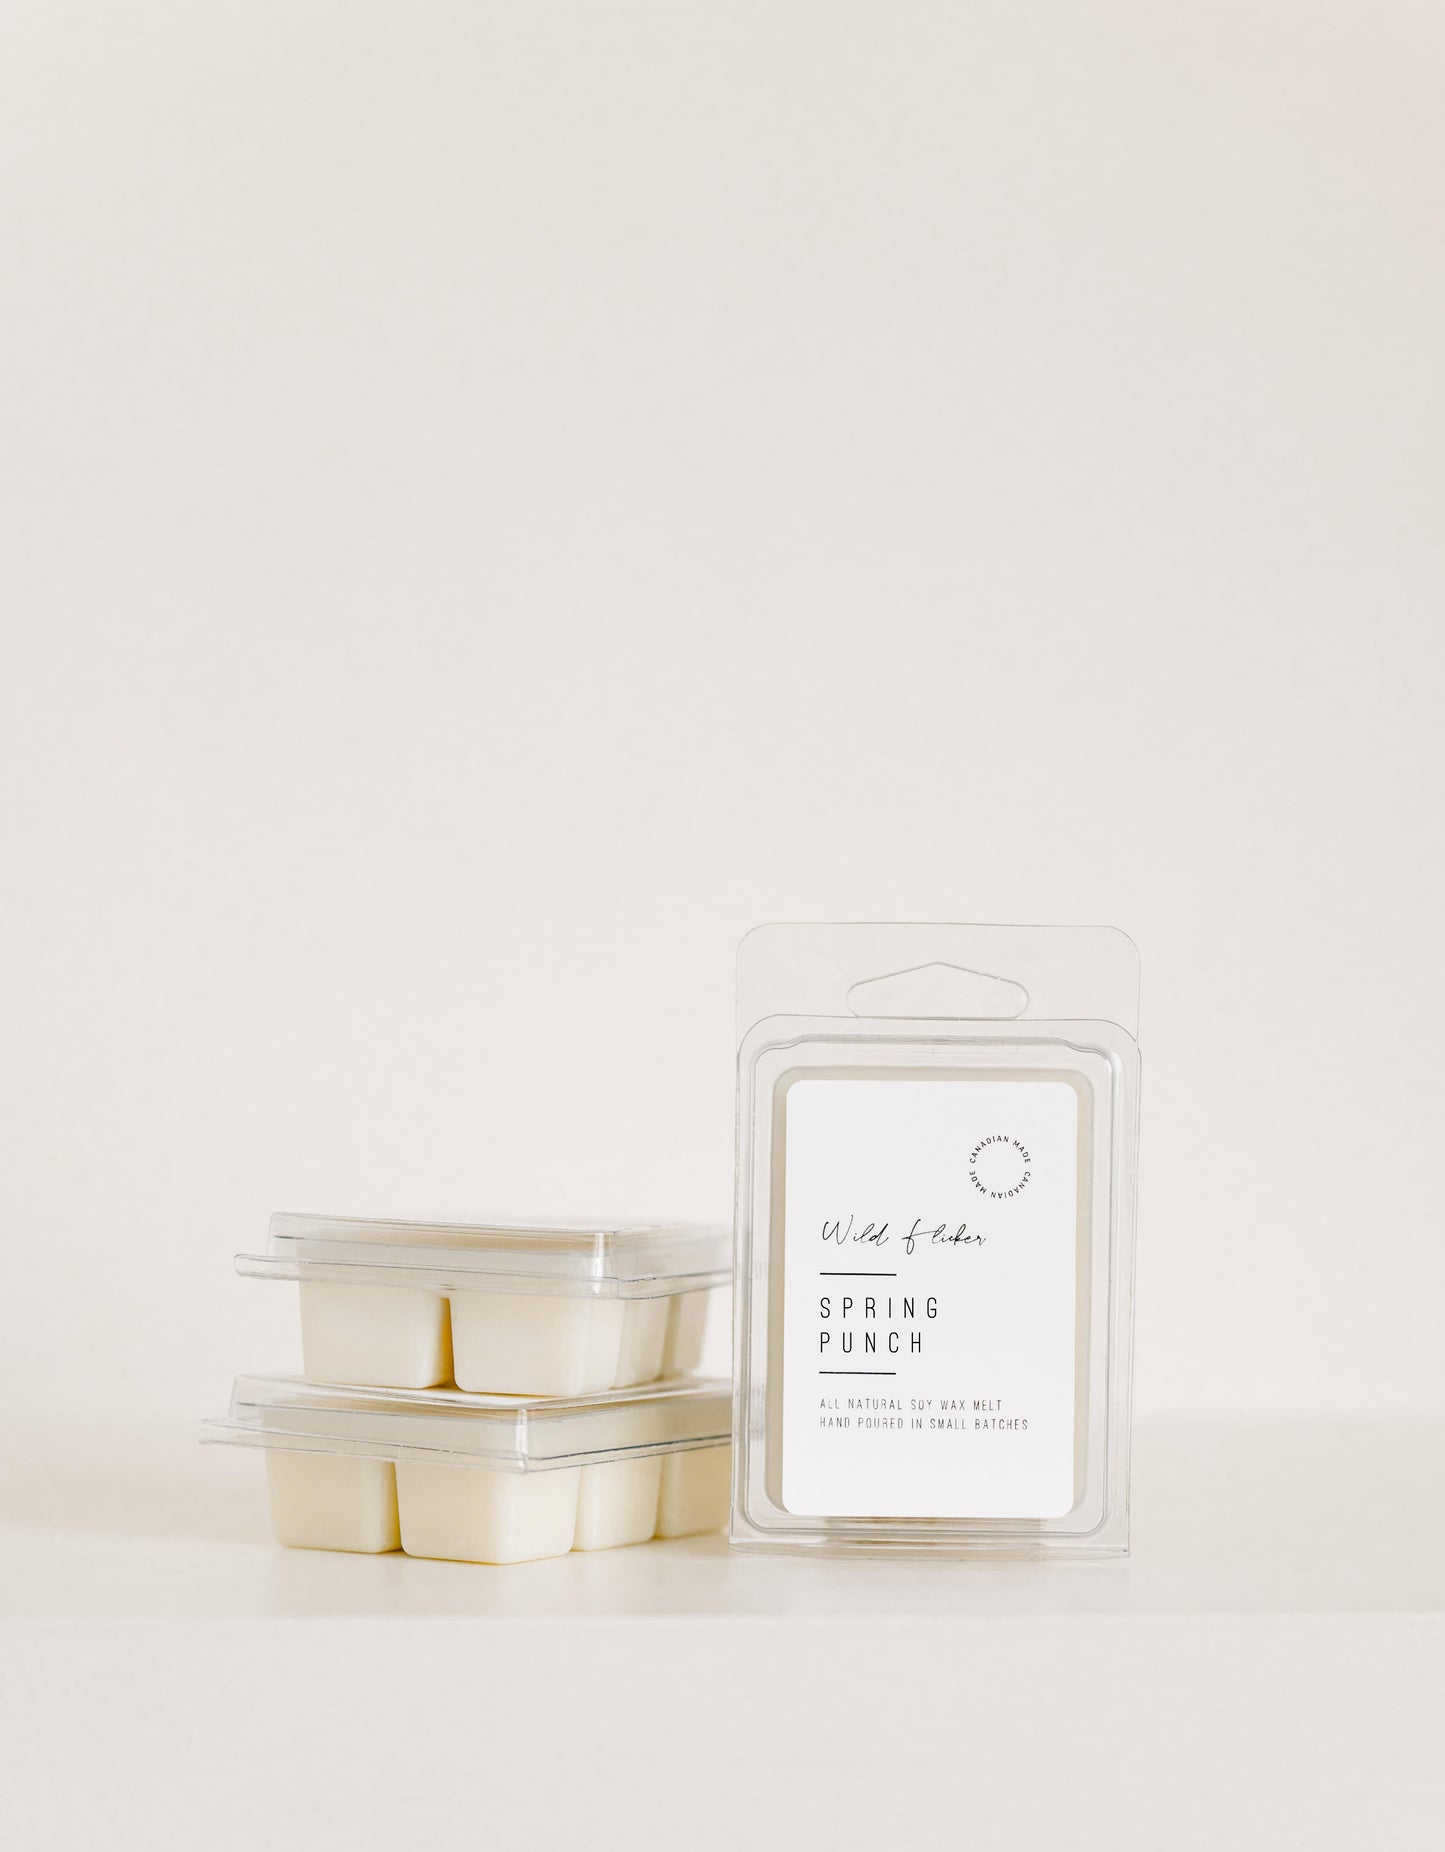 Spring Punch Soy Wax Melts